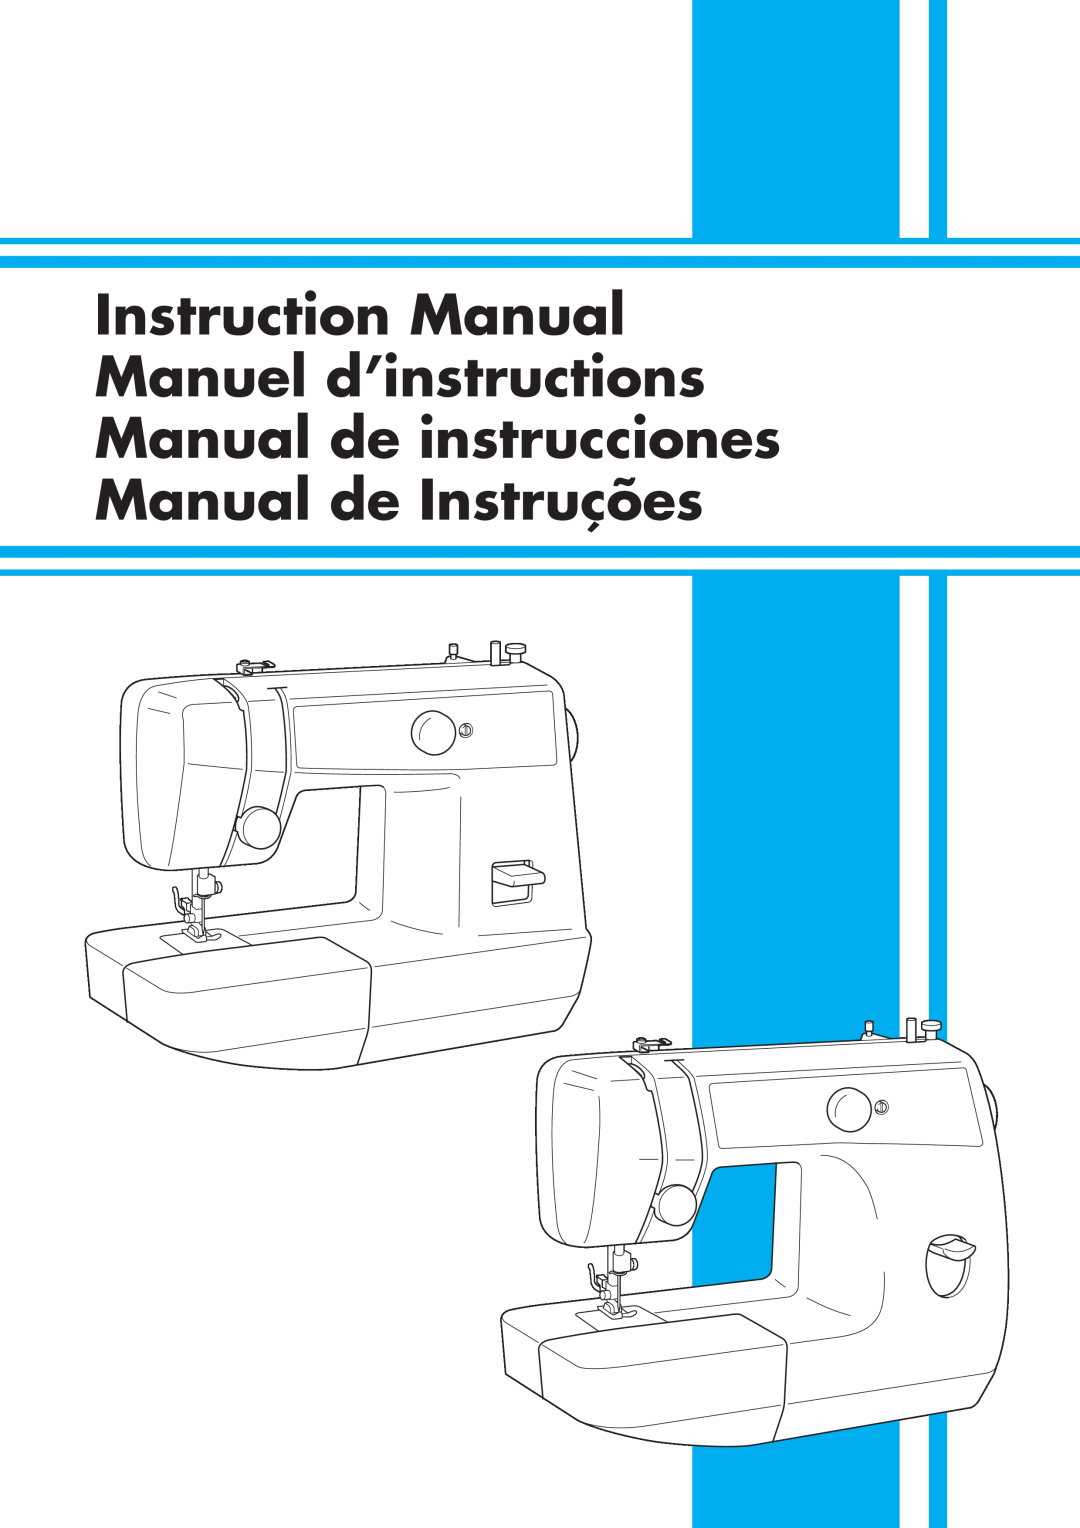 Brother LS 1520 instruction manual 